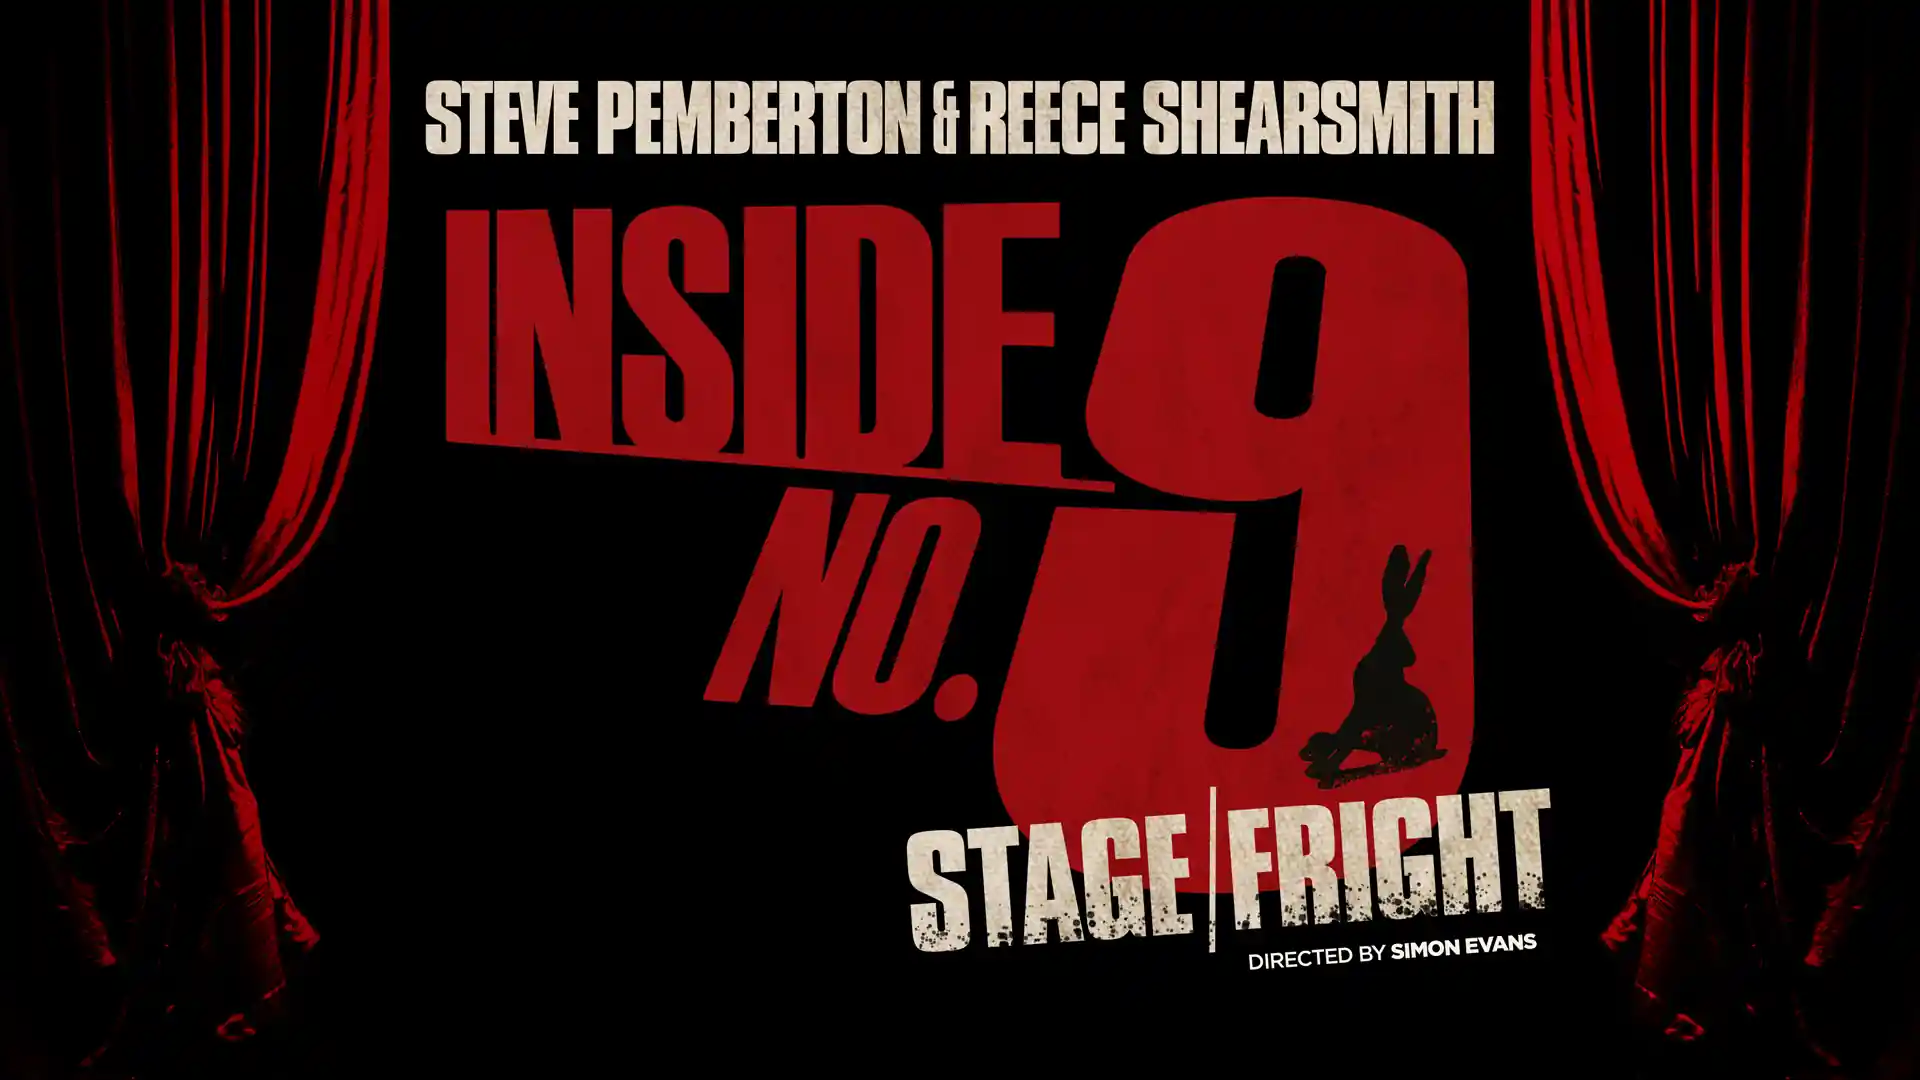 Inside No. 9 Stage/Fright show artwork